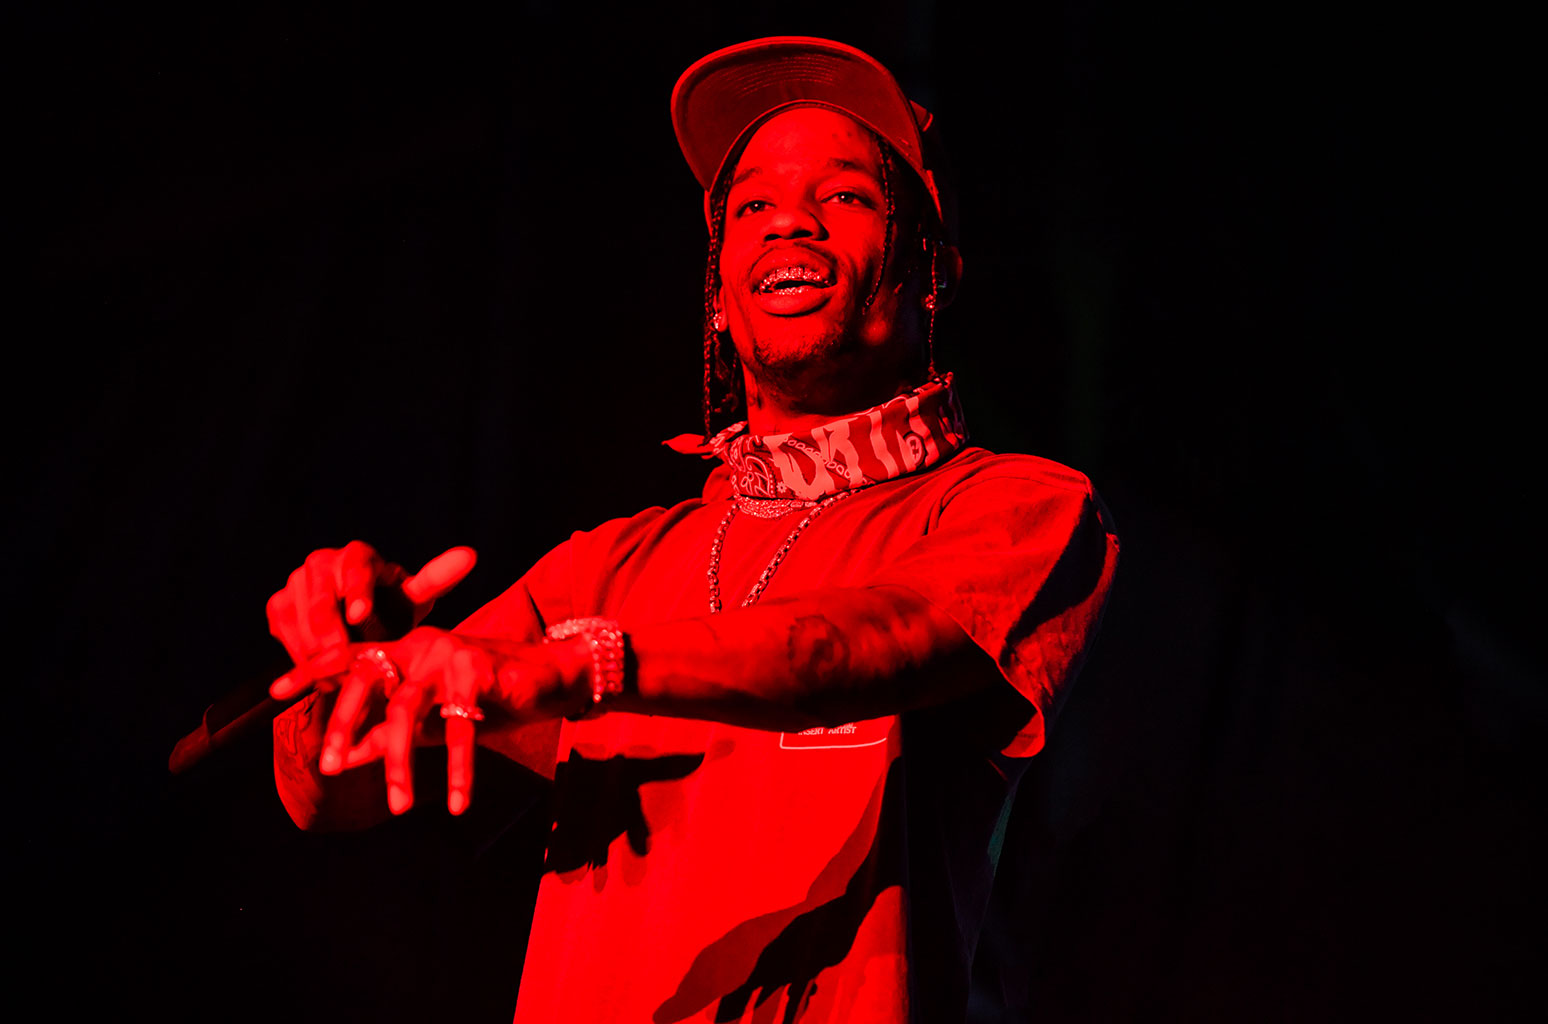 Travis Scott Thanks His Fans &amp; Team for 'Jackboys' No. 1 Debut: 'This Means a Lot to Me' - www.billboard.com